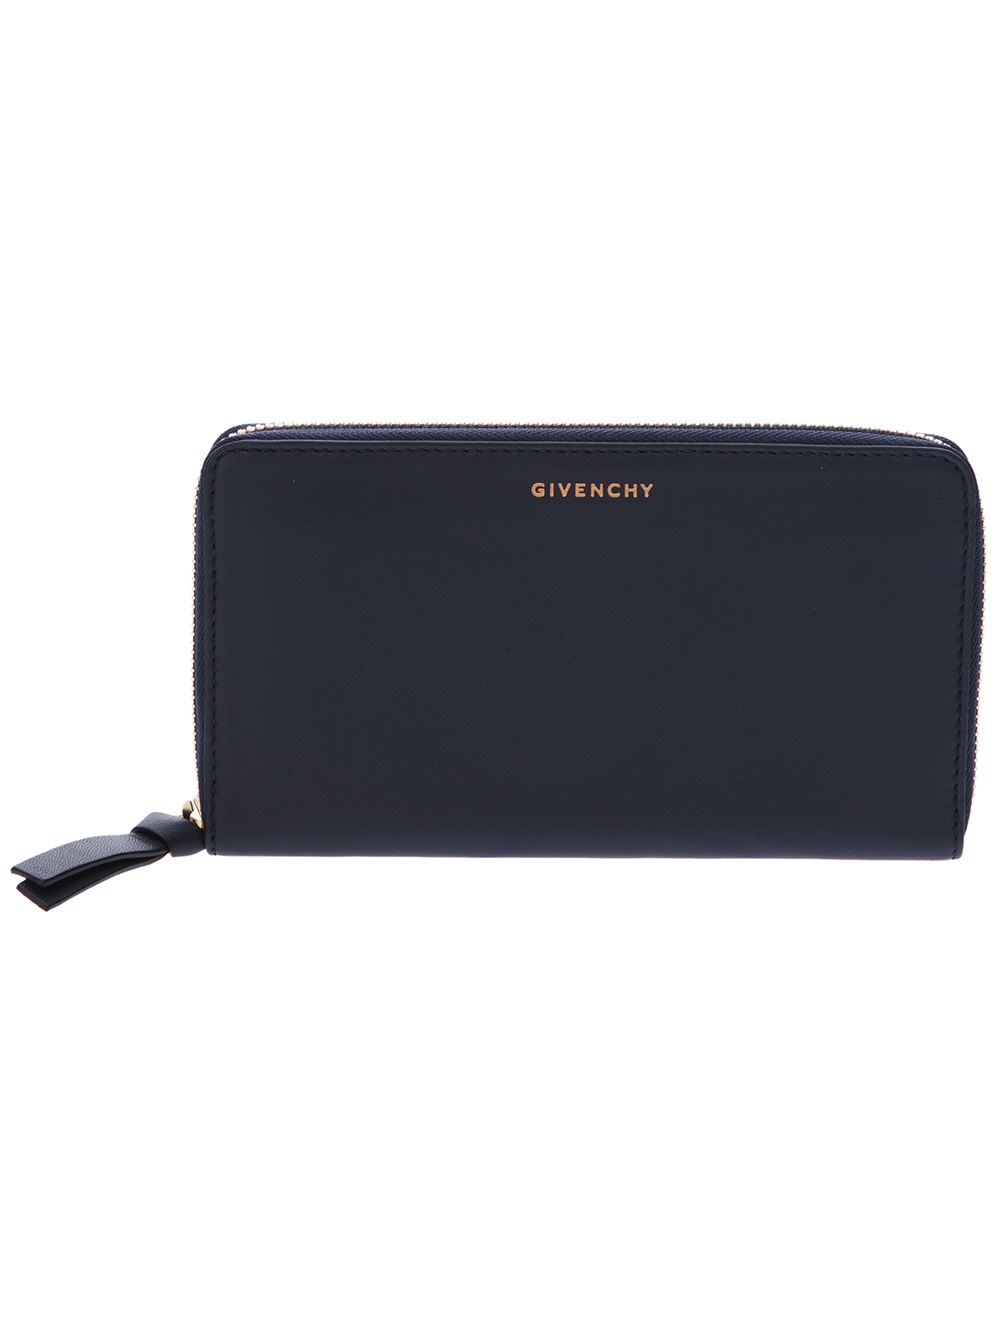 Givenchy Lamb Skin Wallet in Blue for Men | Lyst